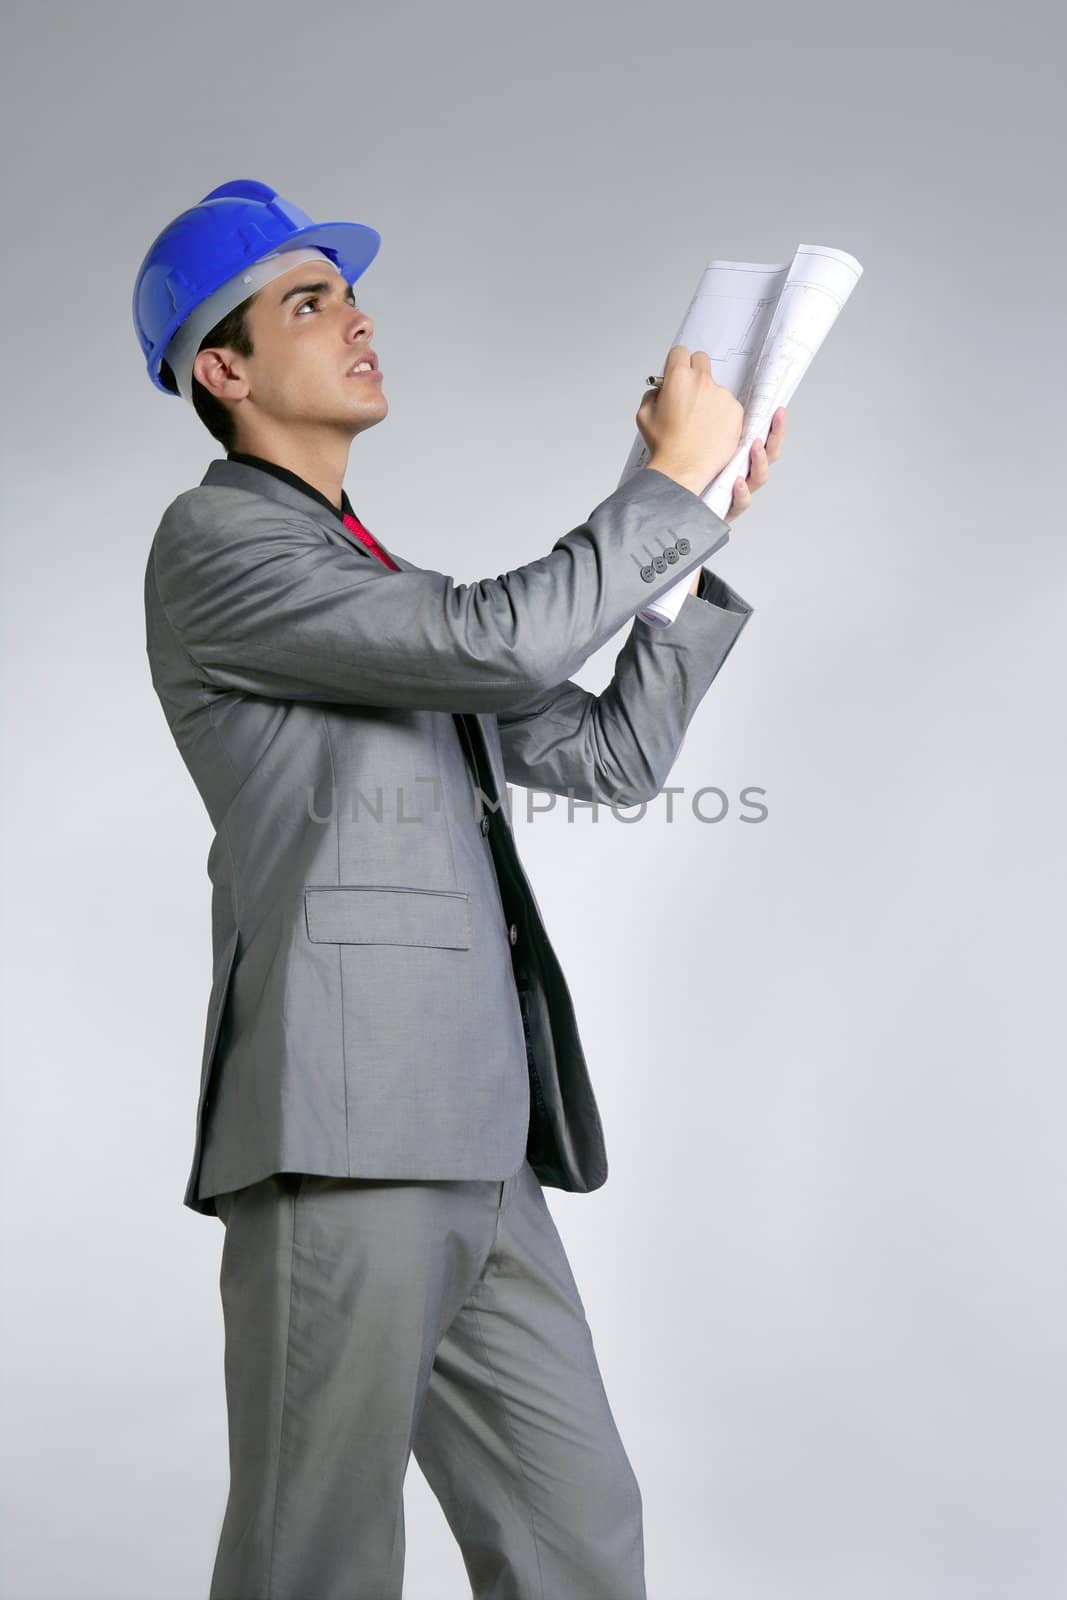 Architect engineer with blue hardhat and suit isolated on gray